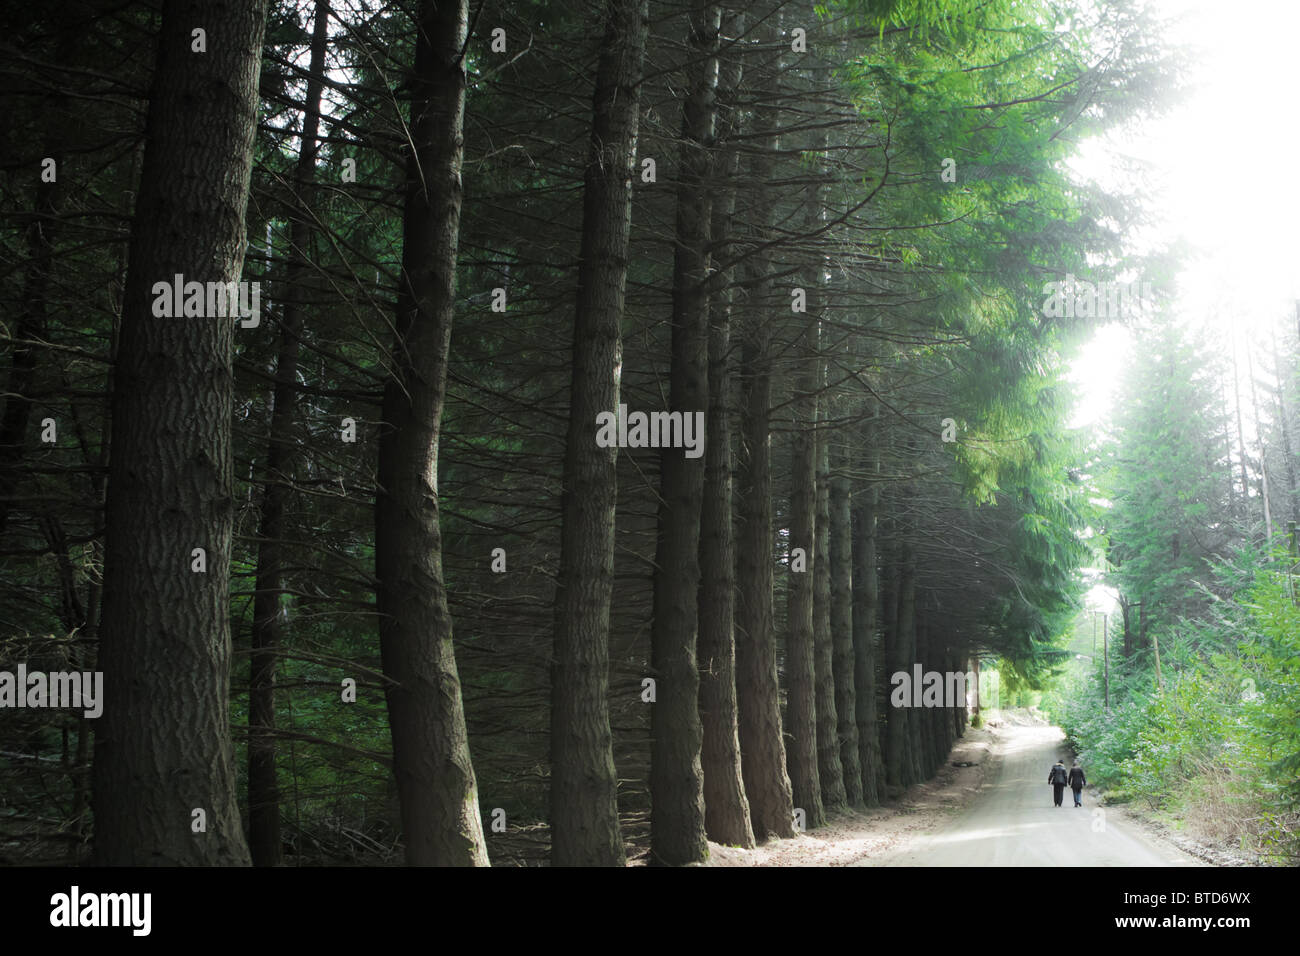 Two people walking through a road with a pine tree forest on one side in Bahia Manzano, Villa La Angostura, Neuquen, Argentina Stock Photo